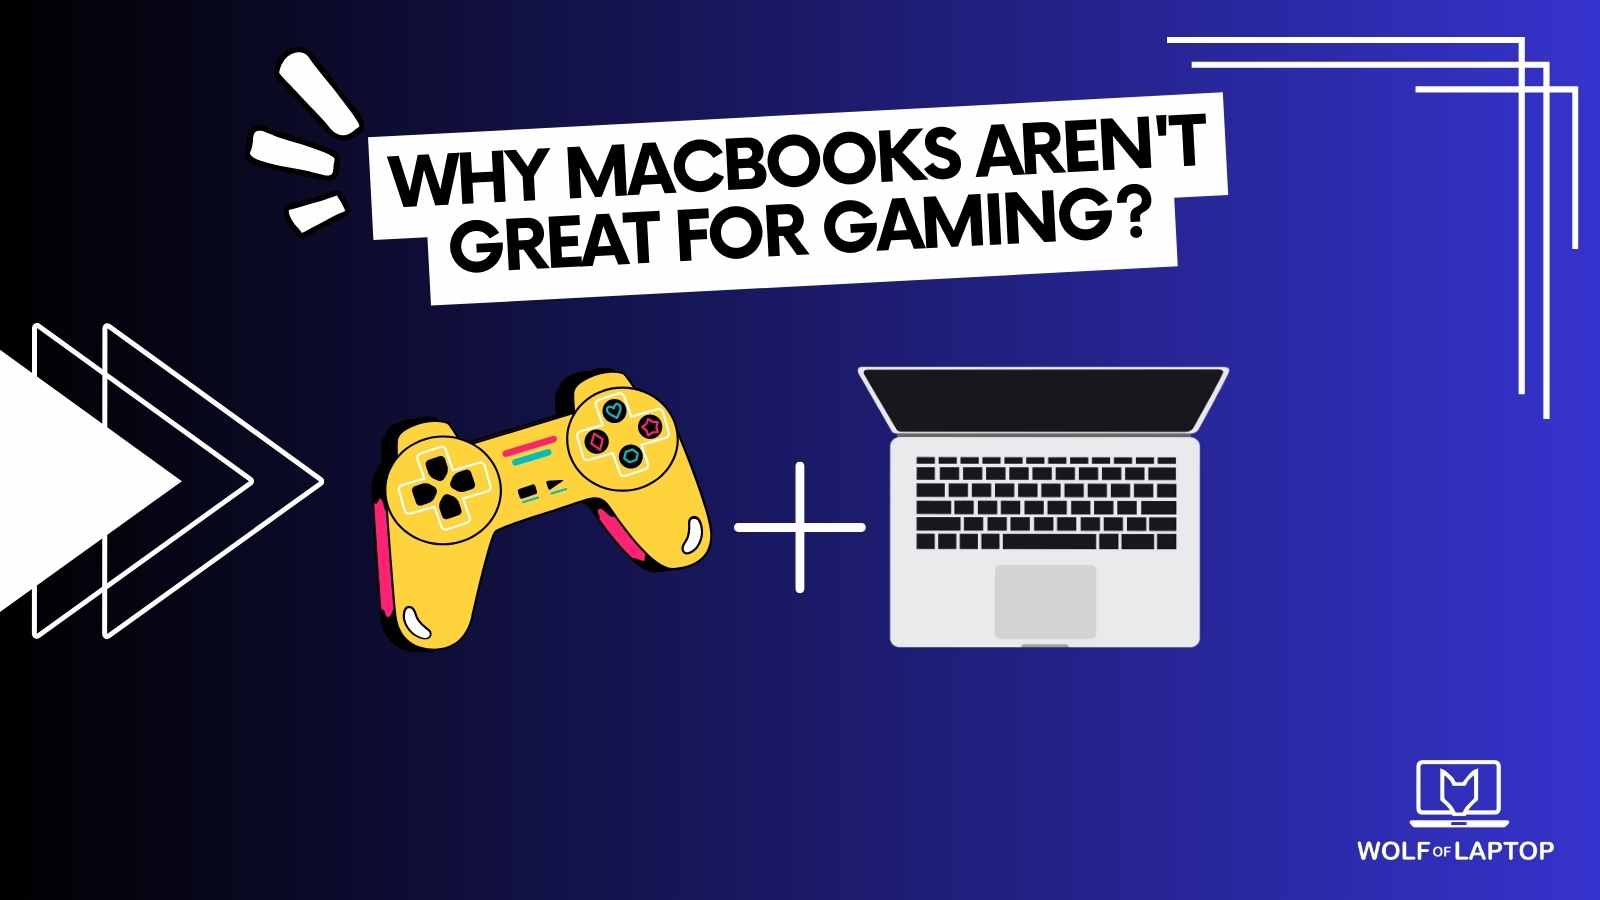 are macbook laptops good for gaming?